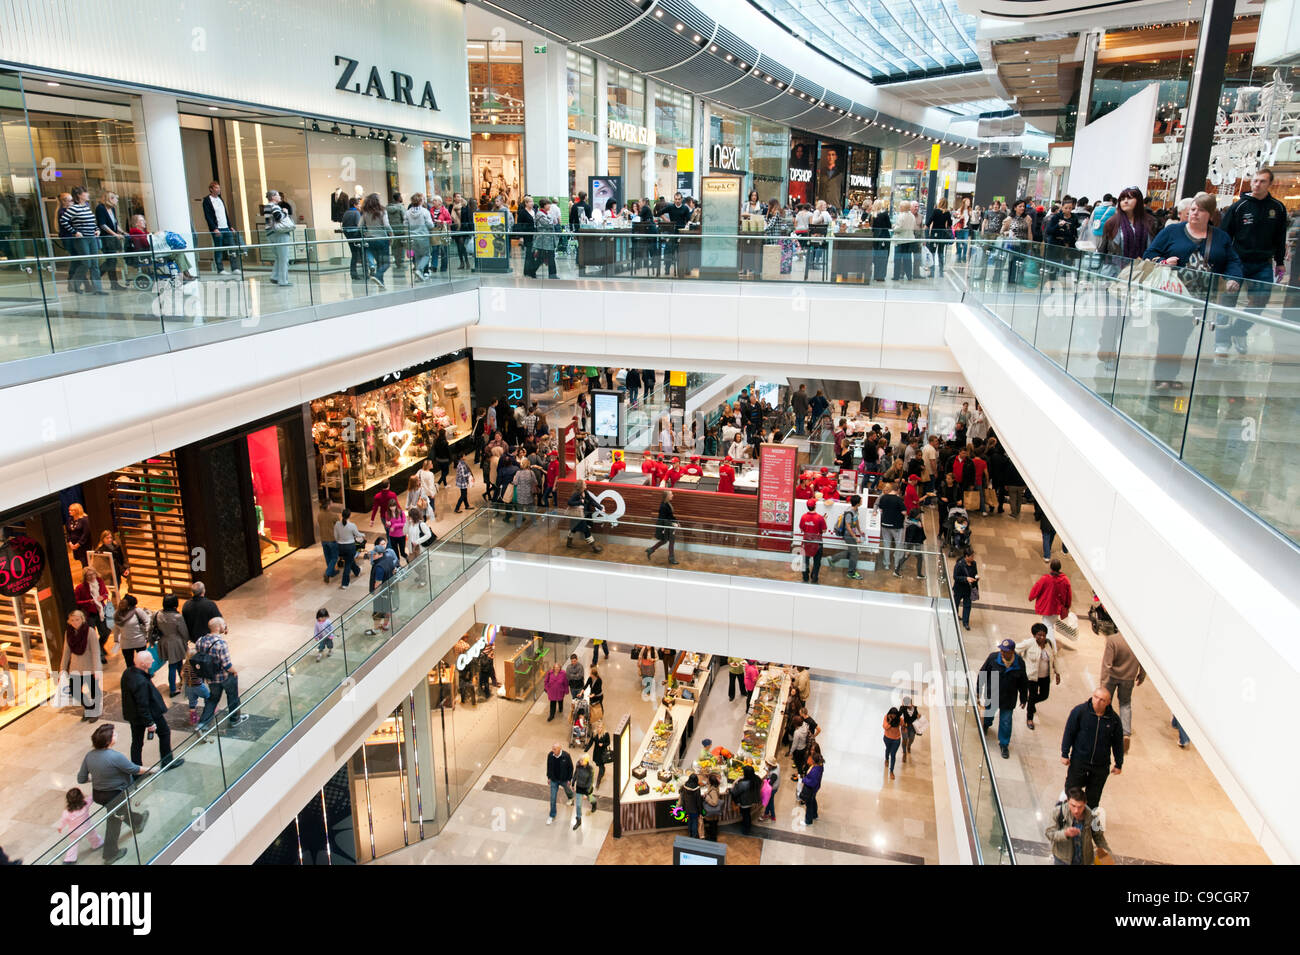 Westfield Stratford City Shopping Mall, Londres, Angleterre, Royaume-Uni Banque D'Images